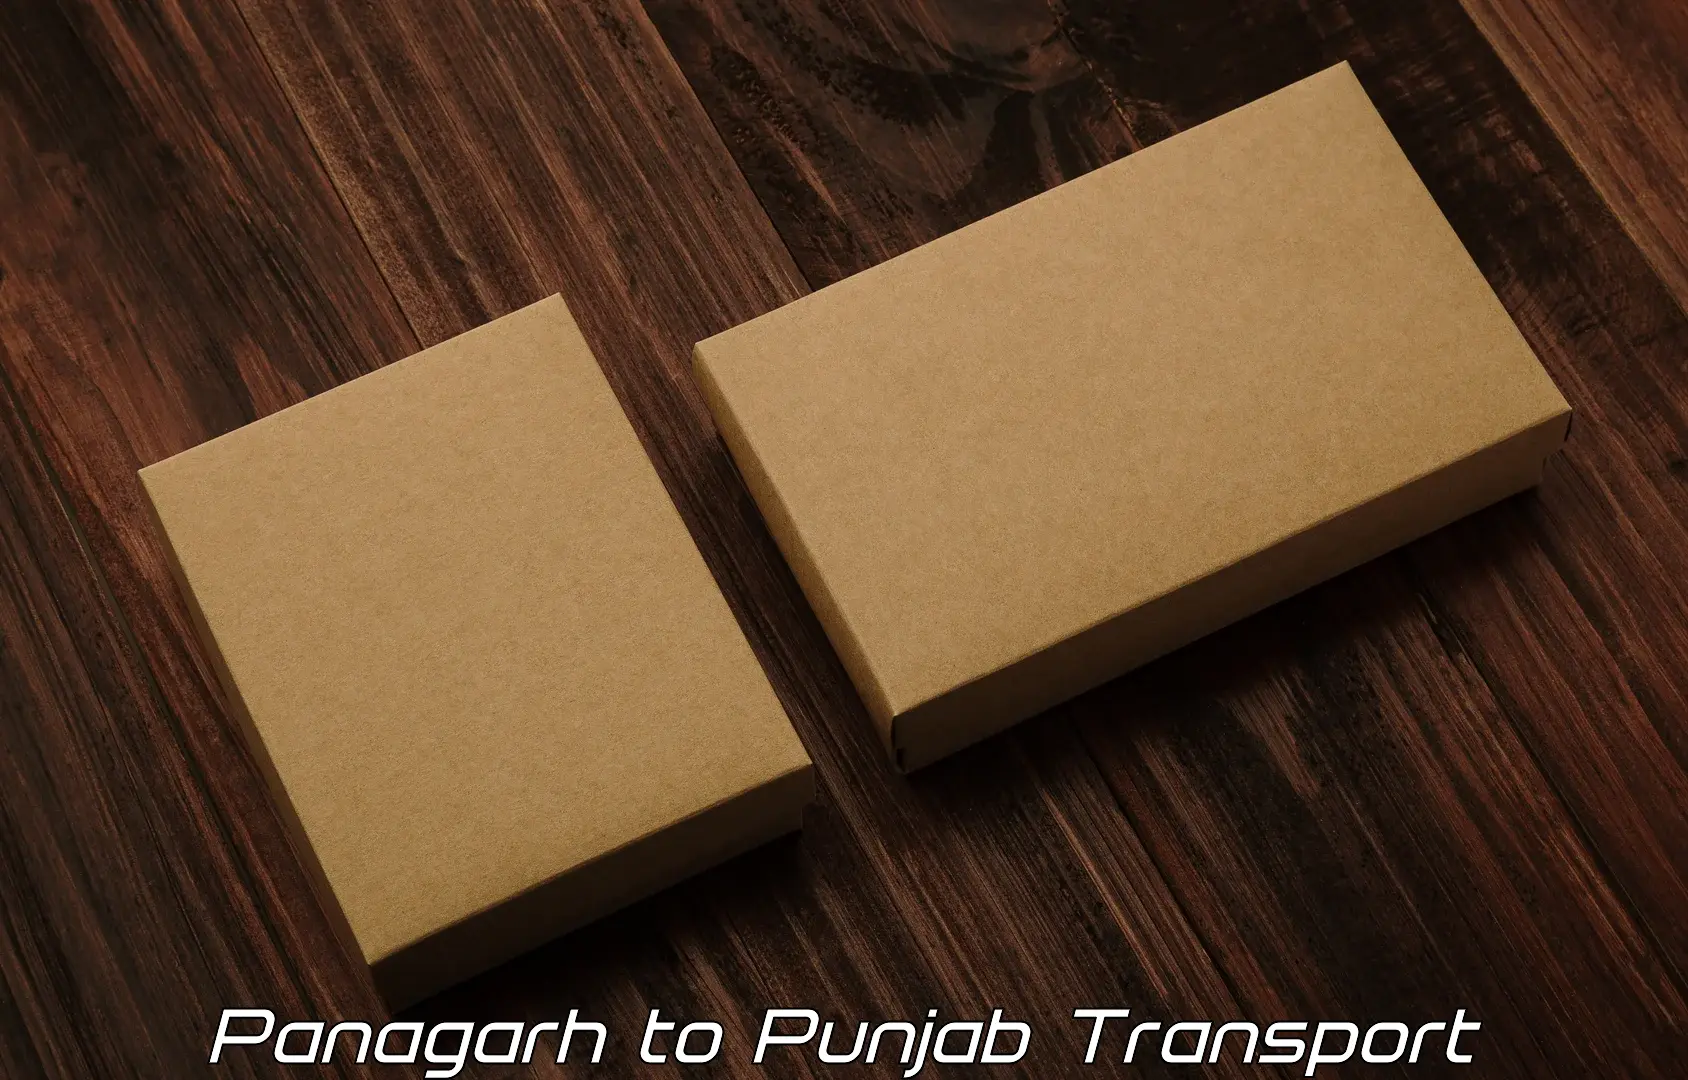 Container transport service in Panagarh to Sunam